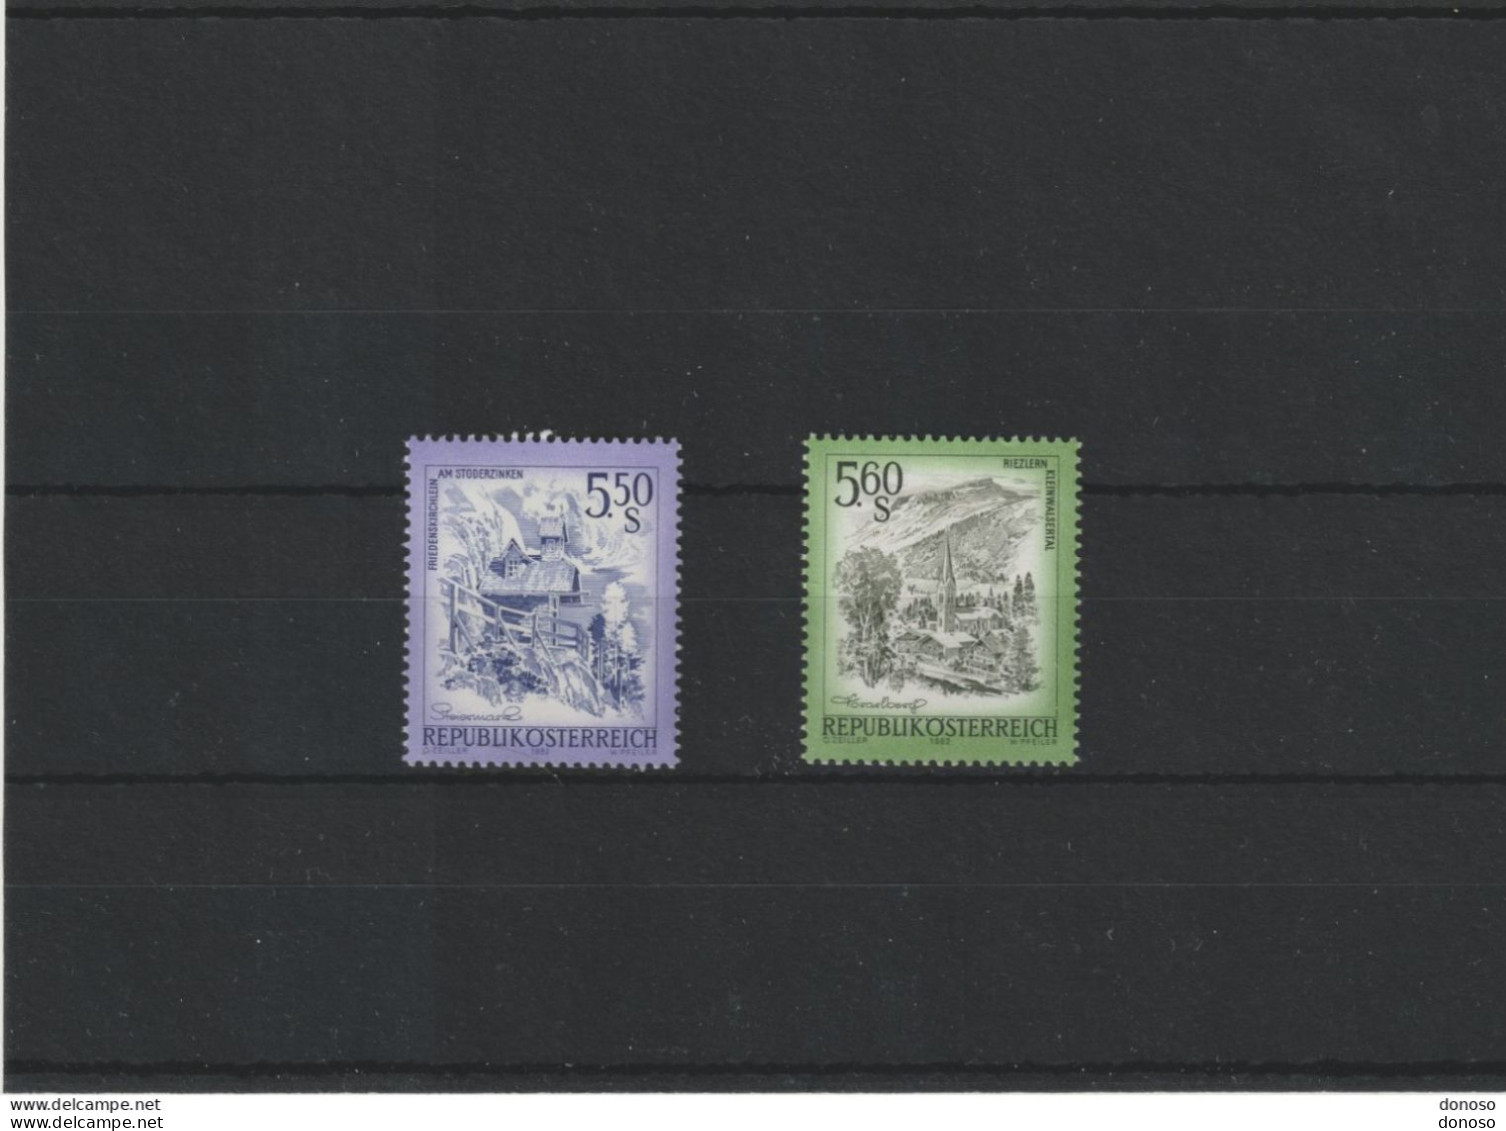 AUTRICHE 1982 Série Courante, Paysages Yvert 1539-1540 NEUF** MNH Cote 5,50 Euros - Unused Stamps